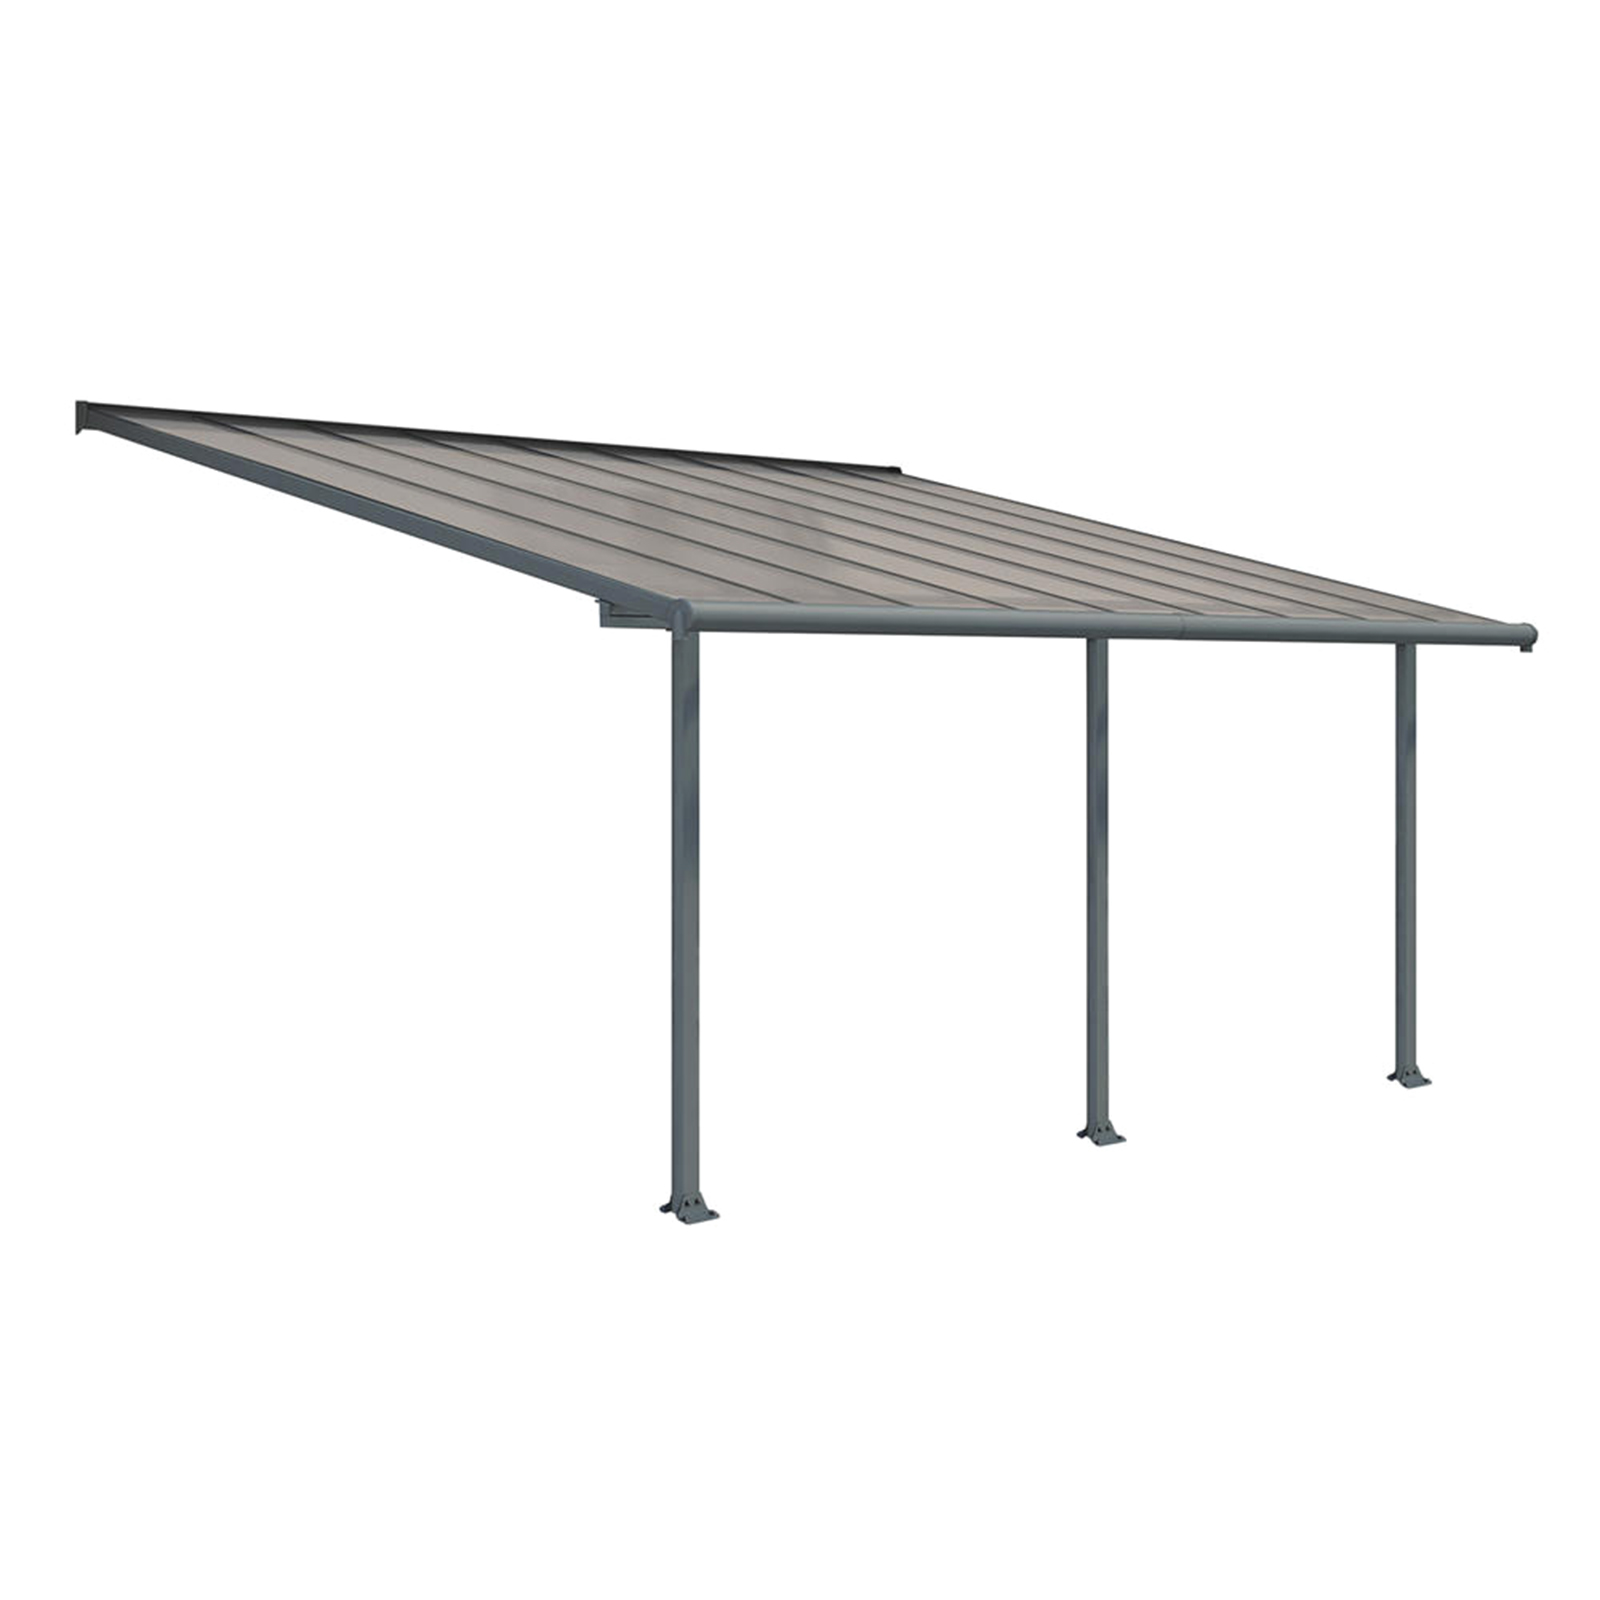 Poly-Tex 18' Olympia Outdoor Patio Cover